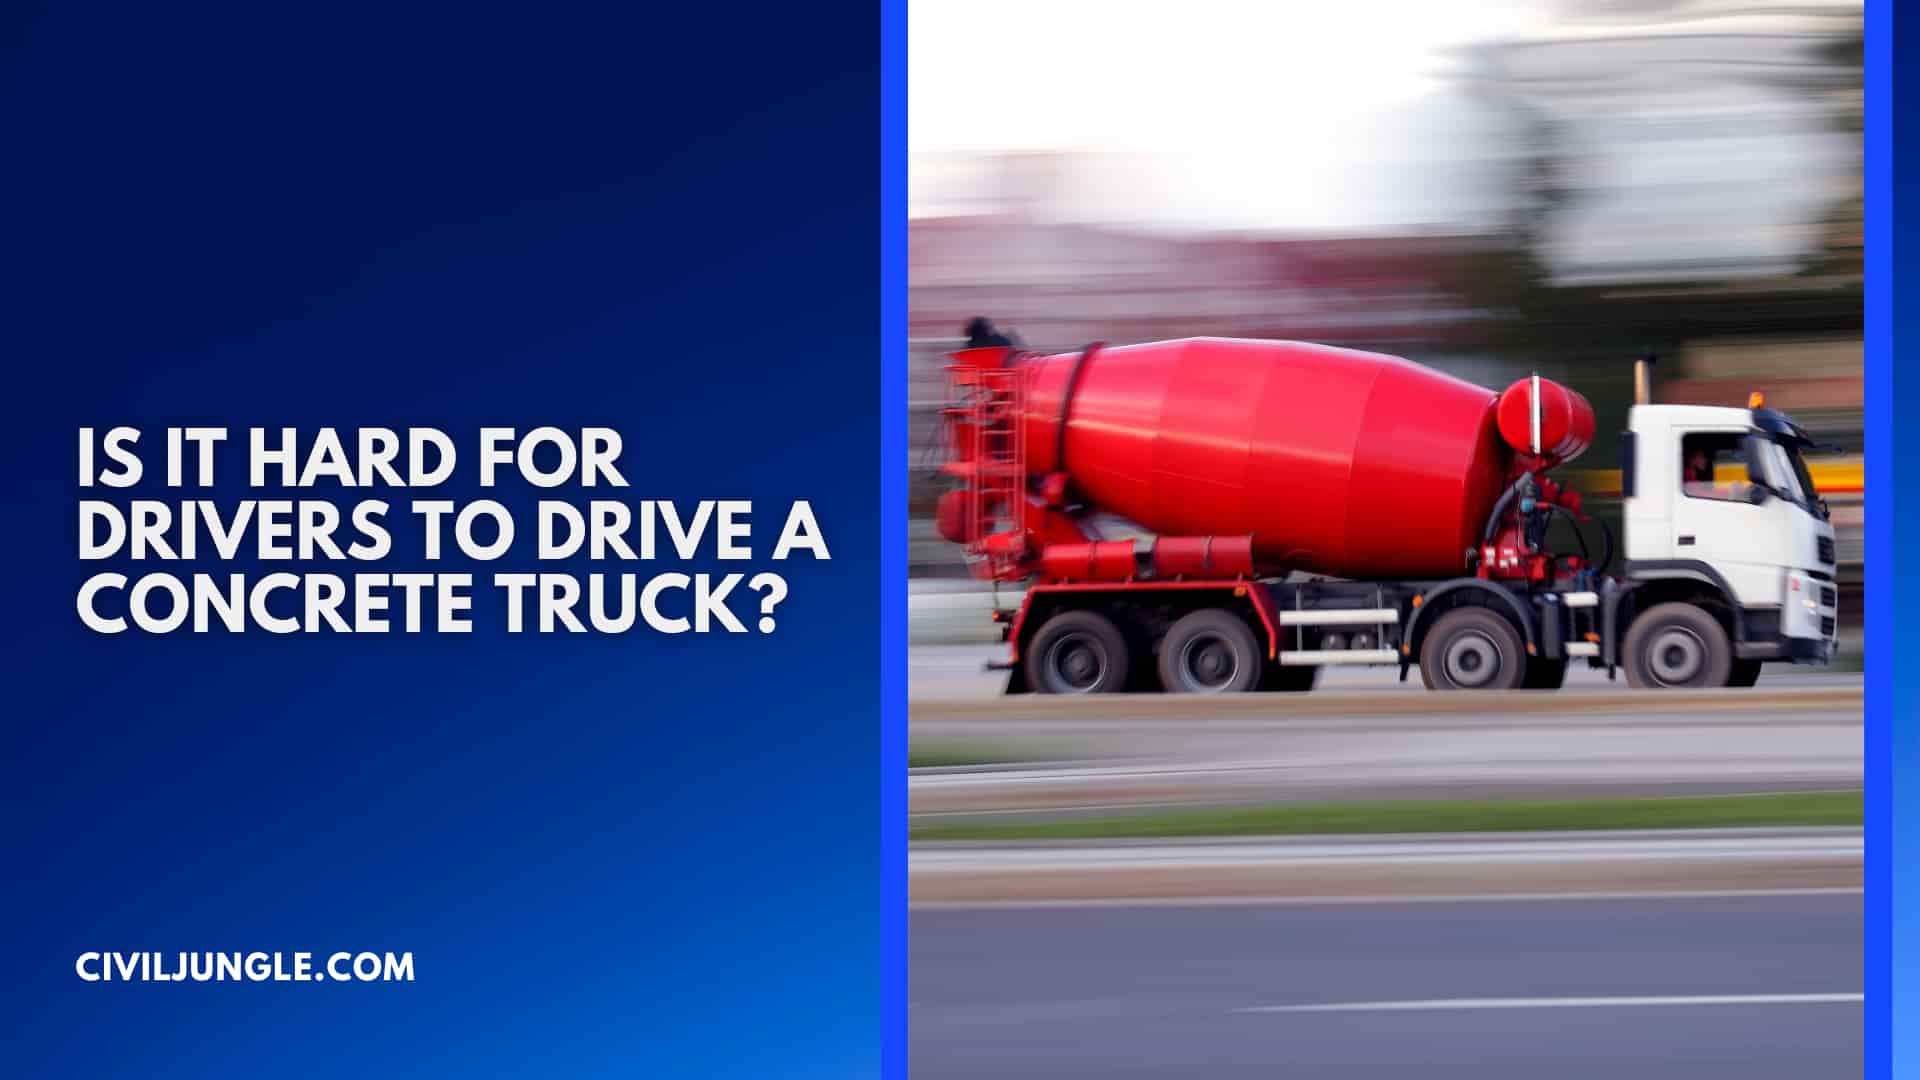 Is It Hard for Drivers to Drive a Concrete Truck?